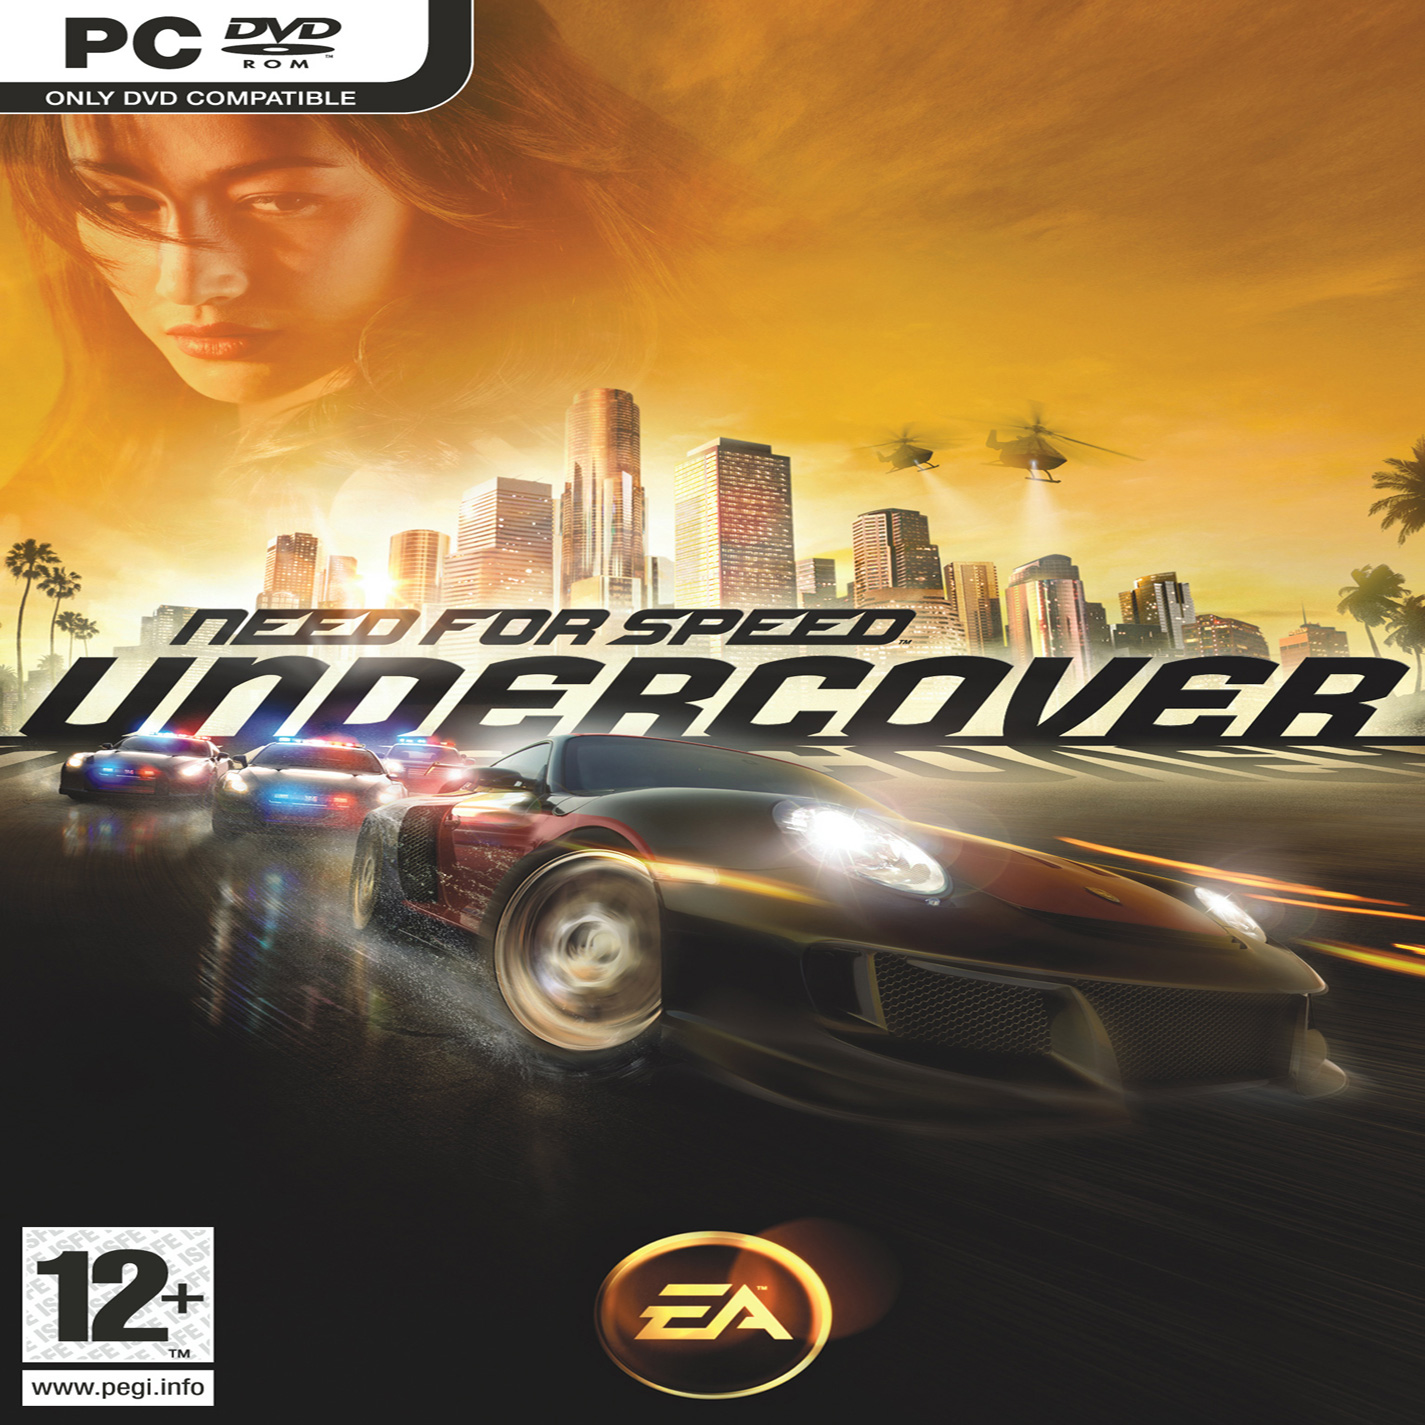 Need for Speed: Undercover - predn CD obal